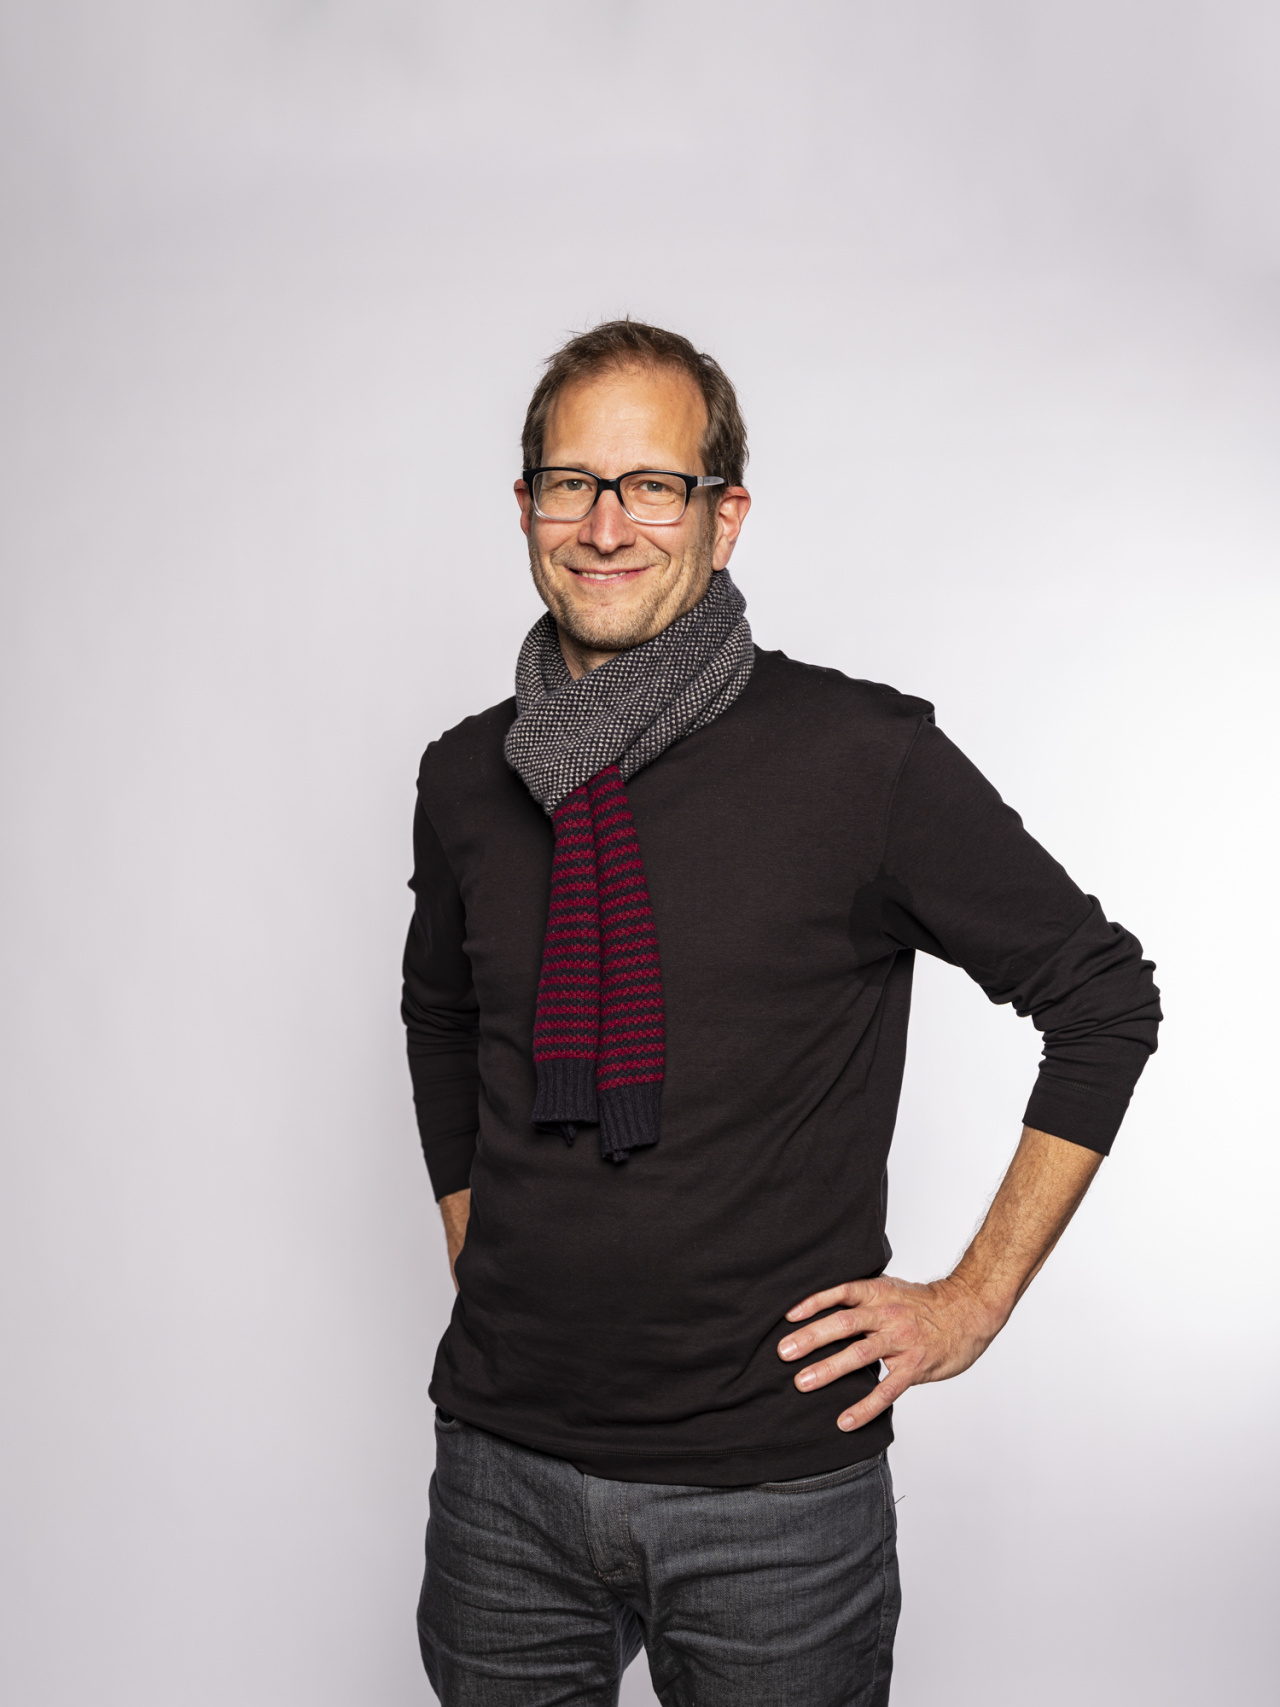 standing smiling man with glasses and gray scarf